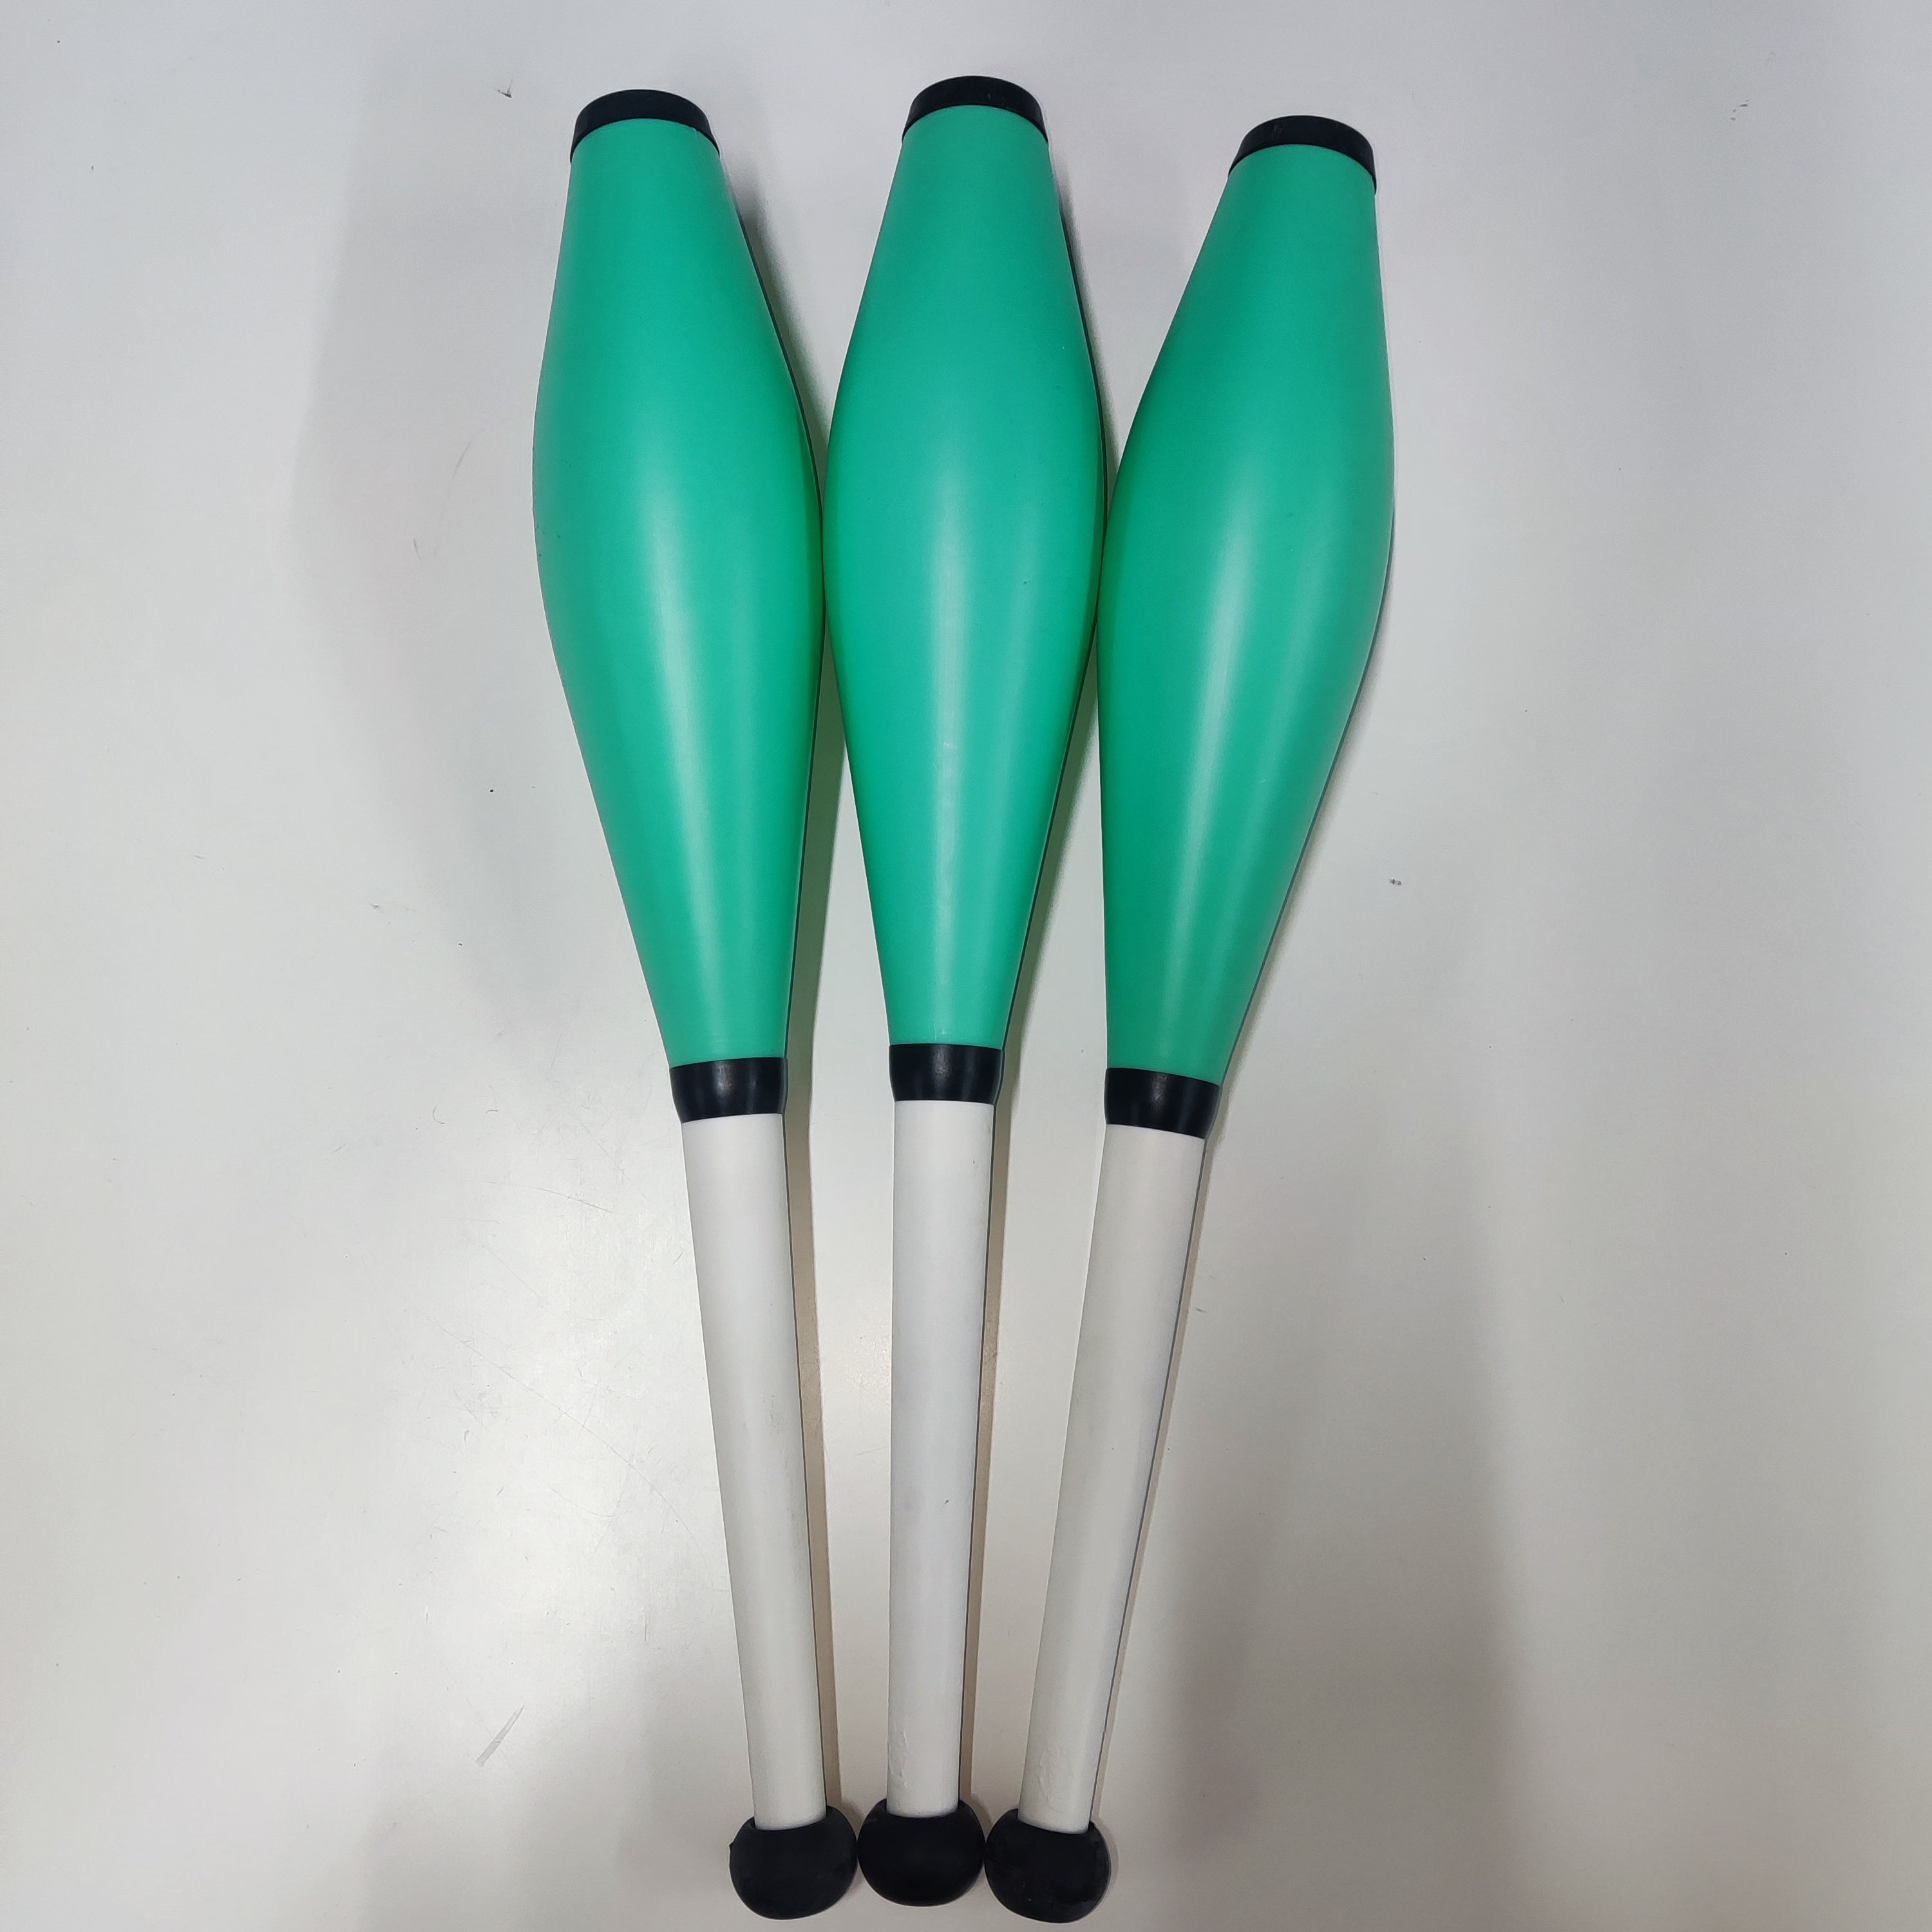  Play PX3 Quantum Juggling Club - SET OF 3 - Pastel Green with Black knobs  - Bargain basement 